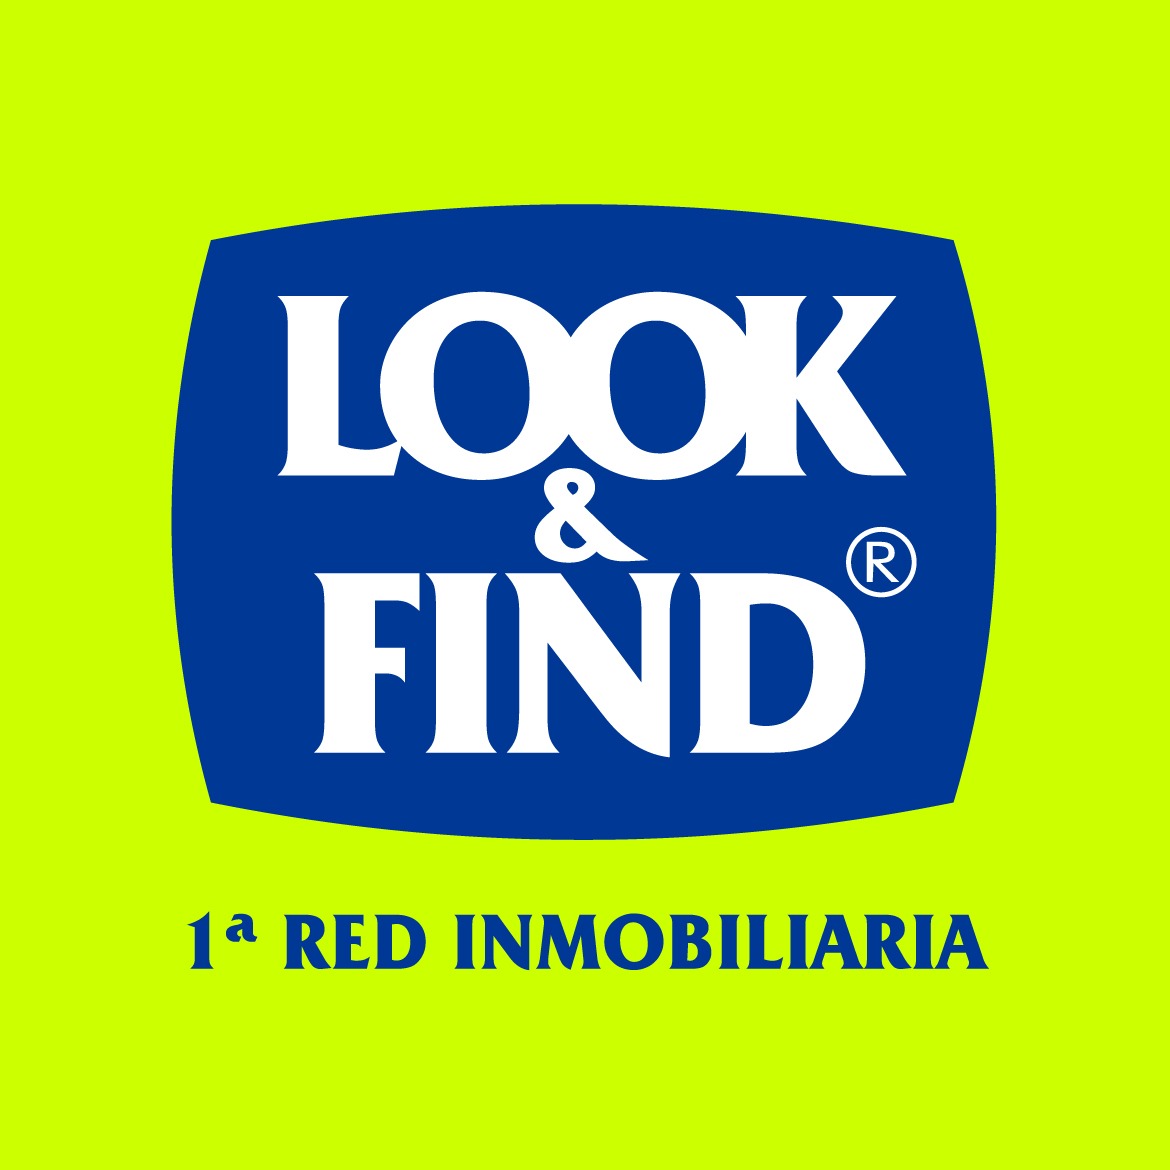 Look & Find Pacífico